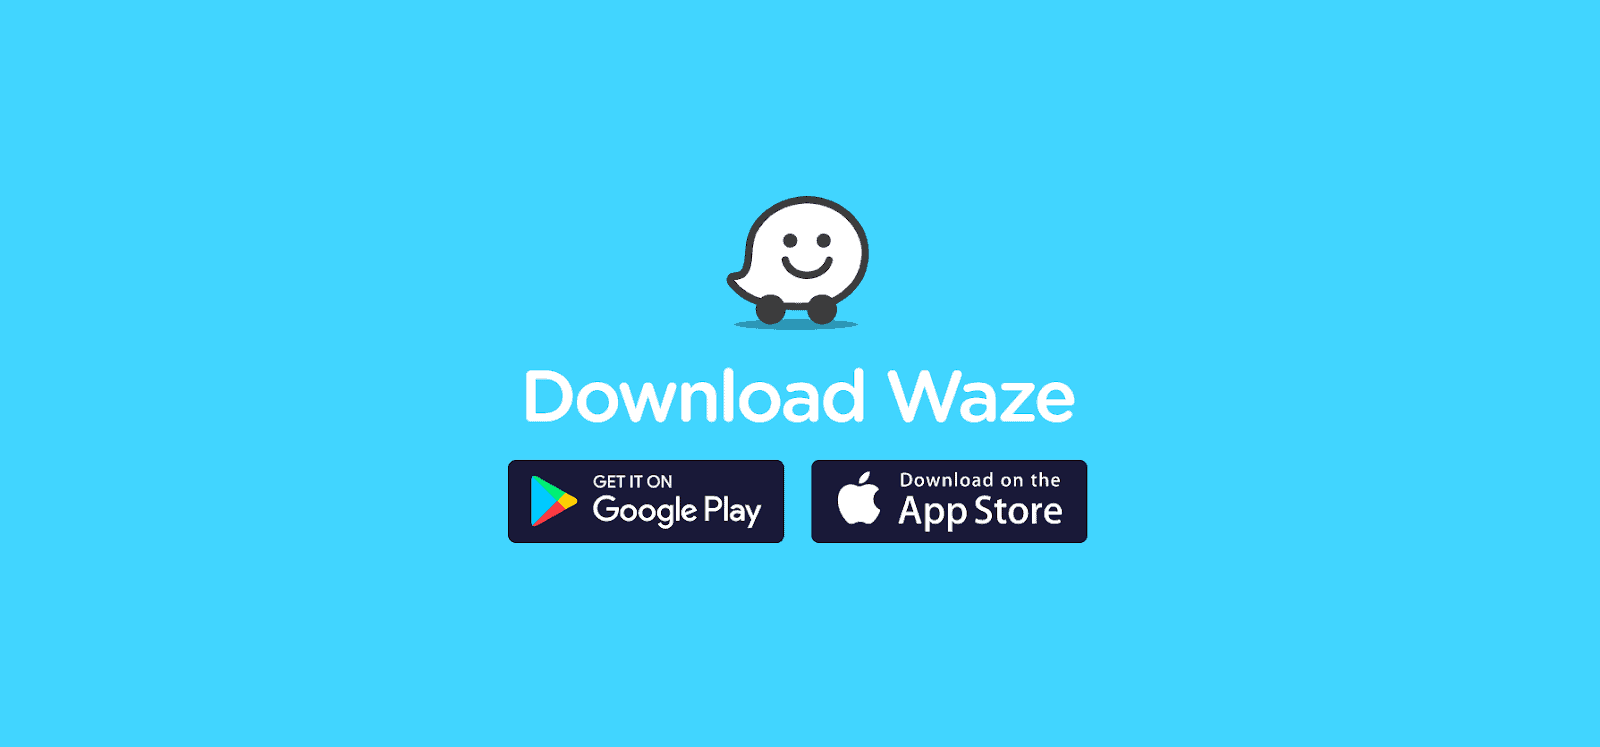 How to use Waze: App download page